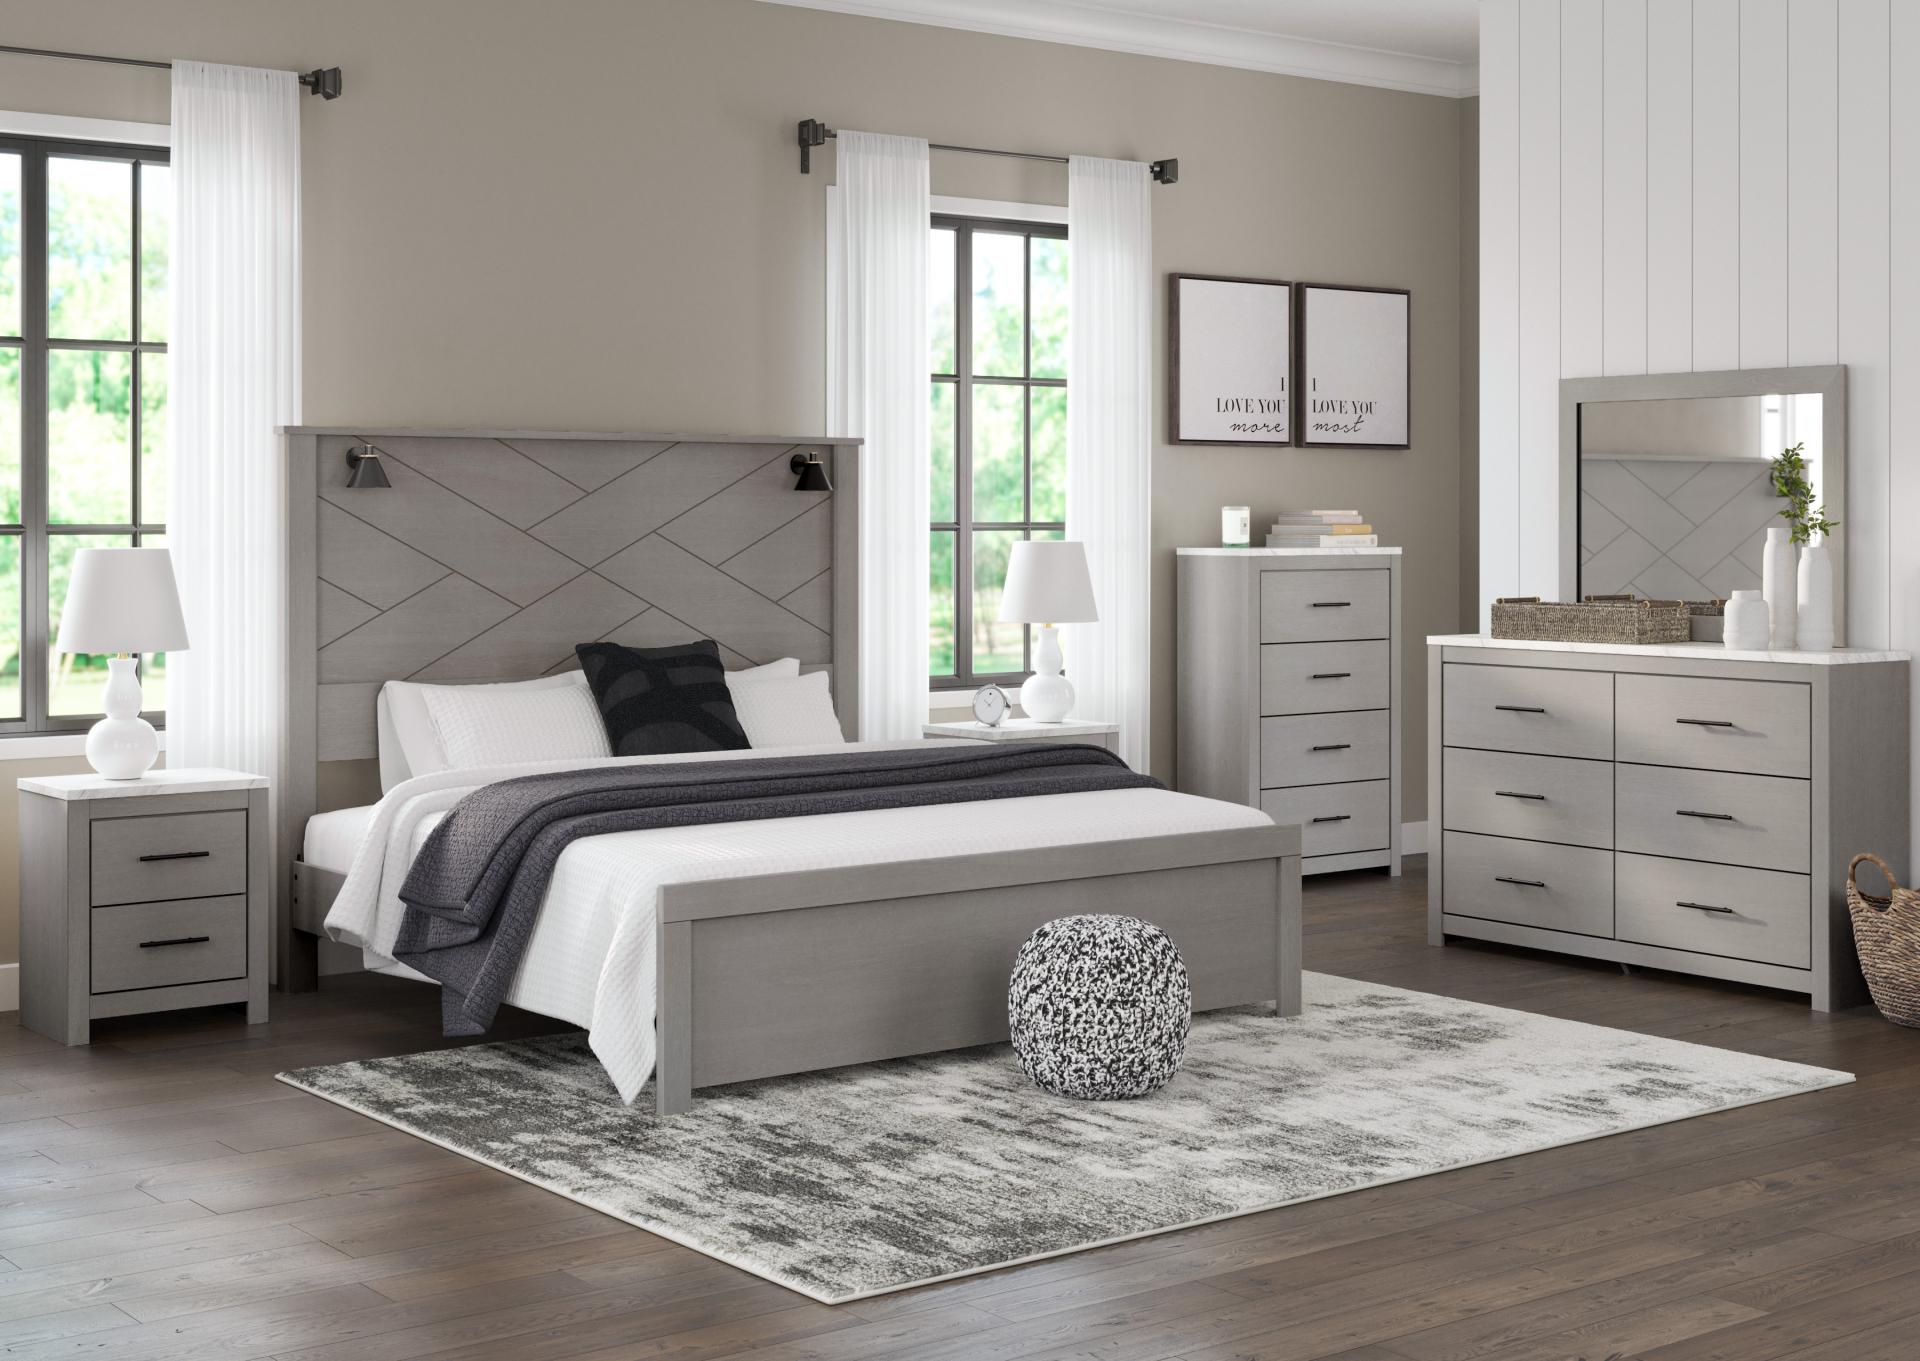 Cottonburg King Bed, Dresser with Mirror, and Night Stand,In Store